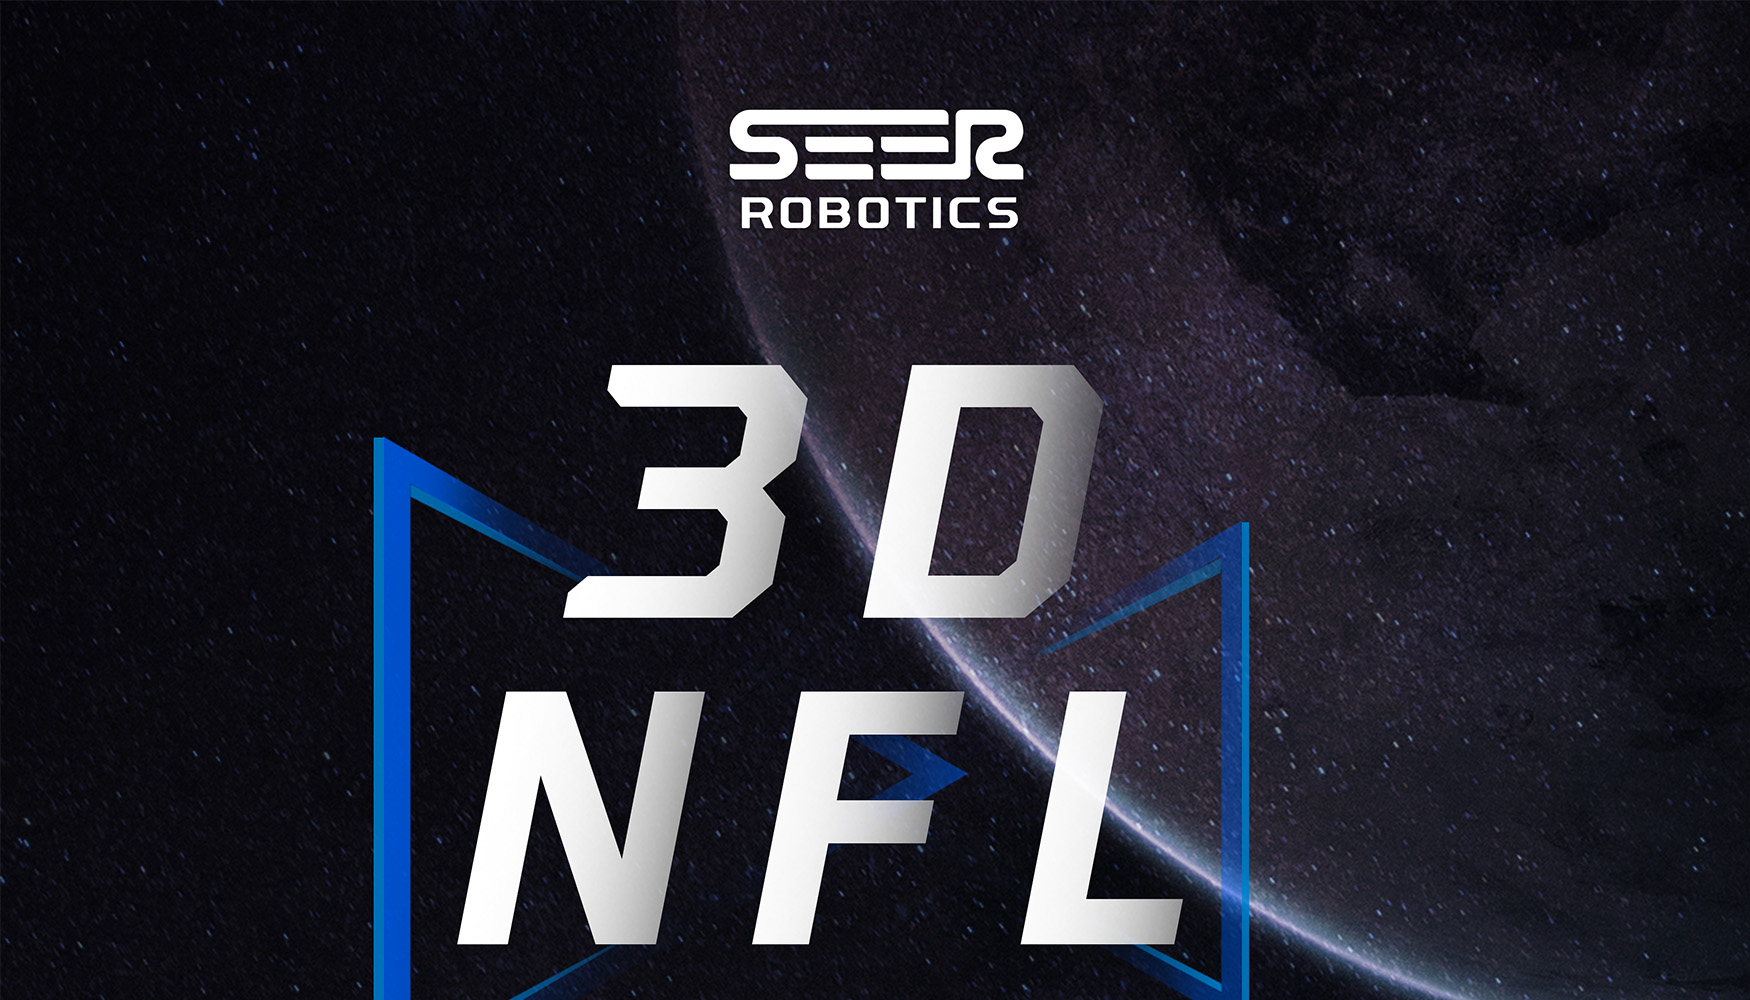 SEER Robotics' new AMR localization solution - 3D NFL (NATURAL FEATURE LOCATION) is way ahead of the industry! 